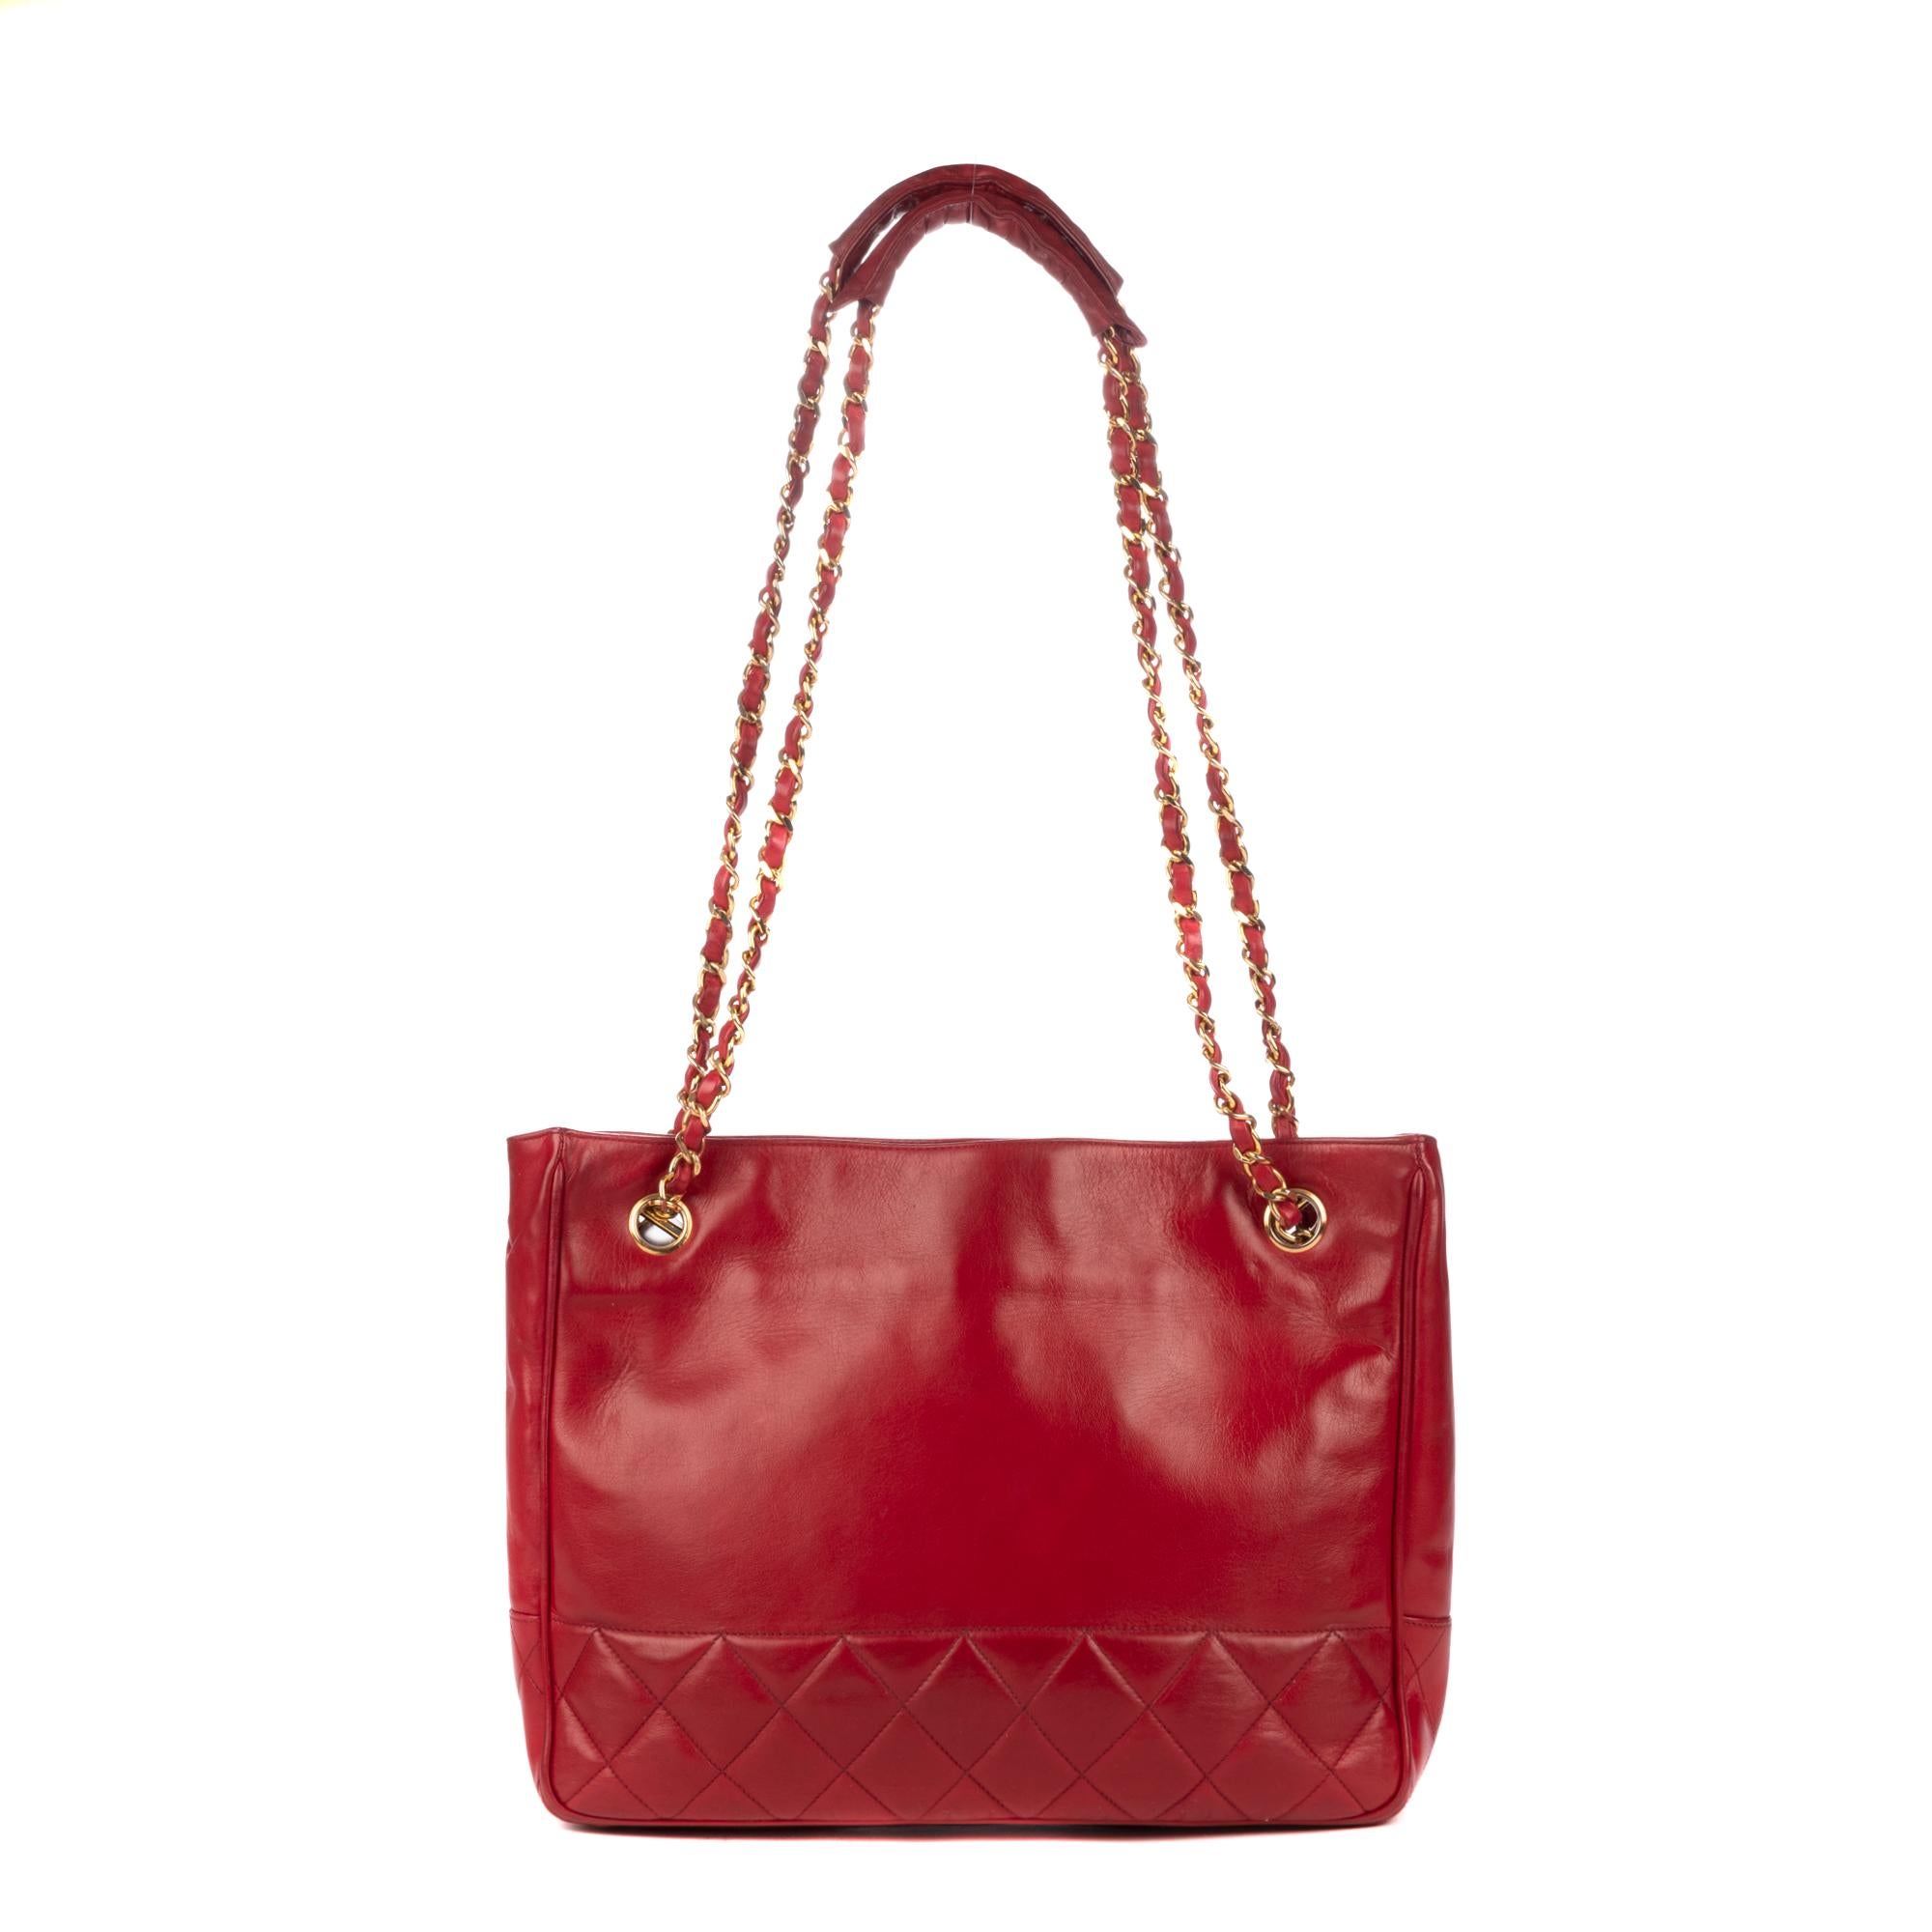  Very nice vintage Chanel tote in red lambskin partially quilted, snap closure, double handle with gold metal chain interlaced with red leather, charm with CC logo.  Red leather interior, double zipped pocket, hologram. 
 Signature: 